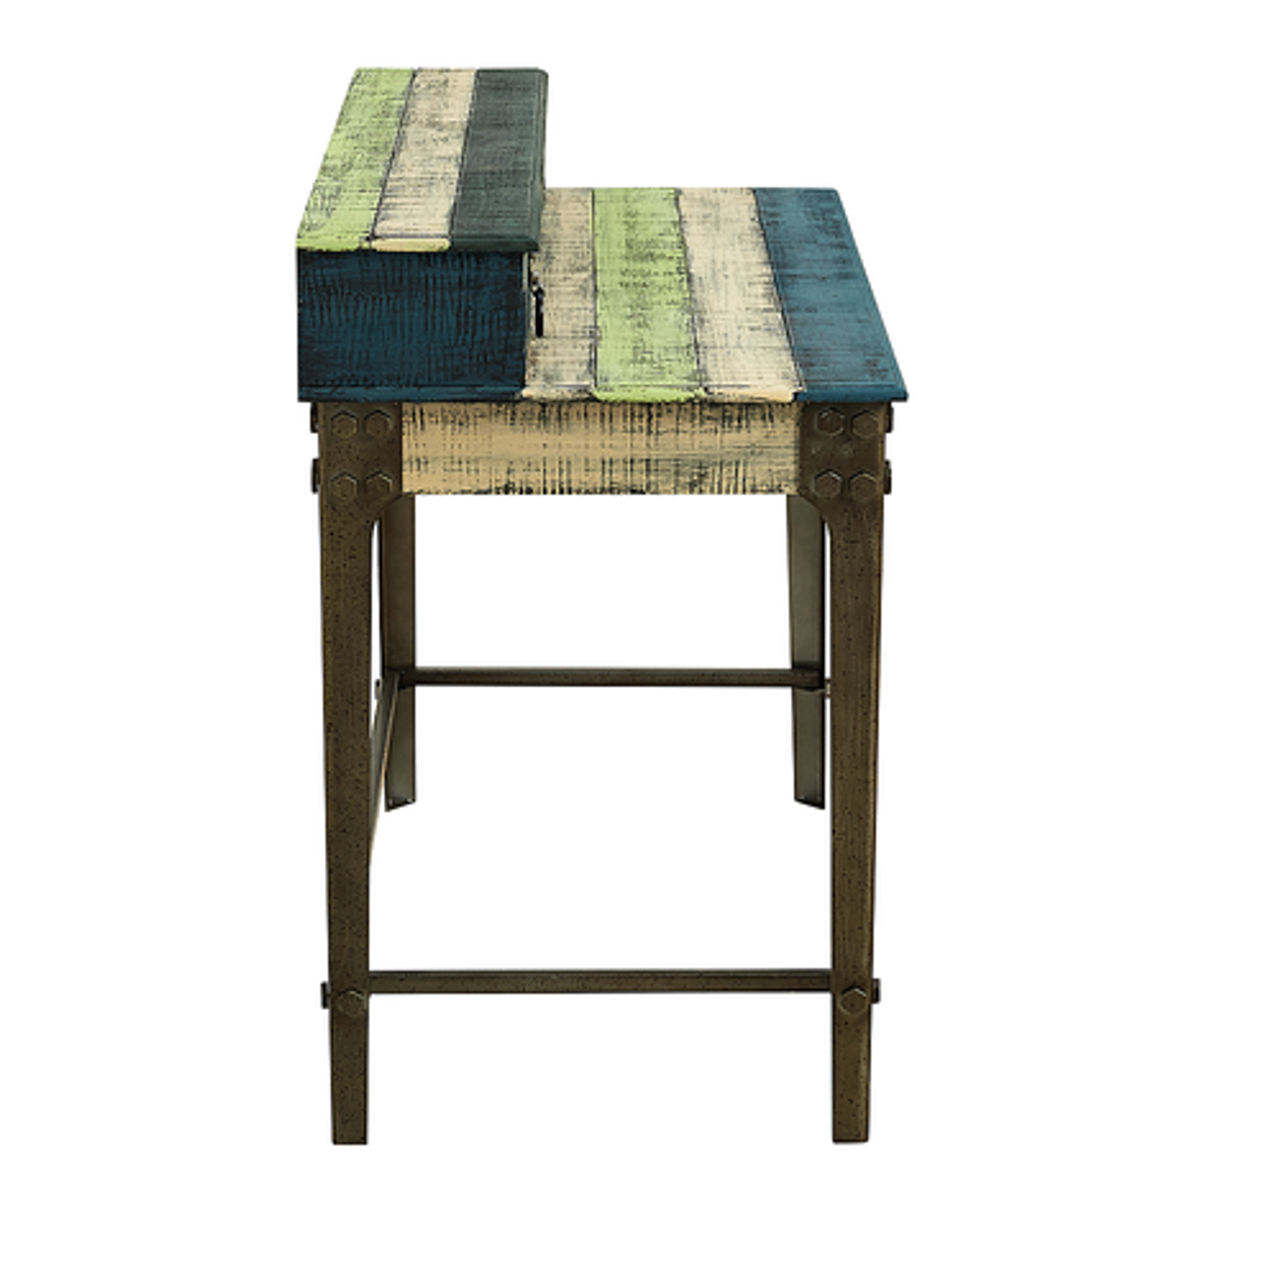 Linon Home Décor - Calson Three-Drawer Weathered Industrial-Style Desk - Multicolor Stripes